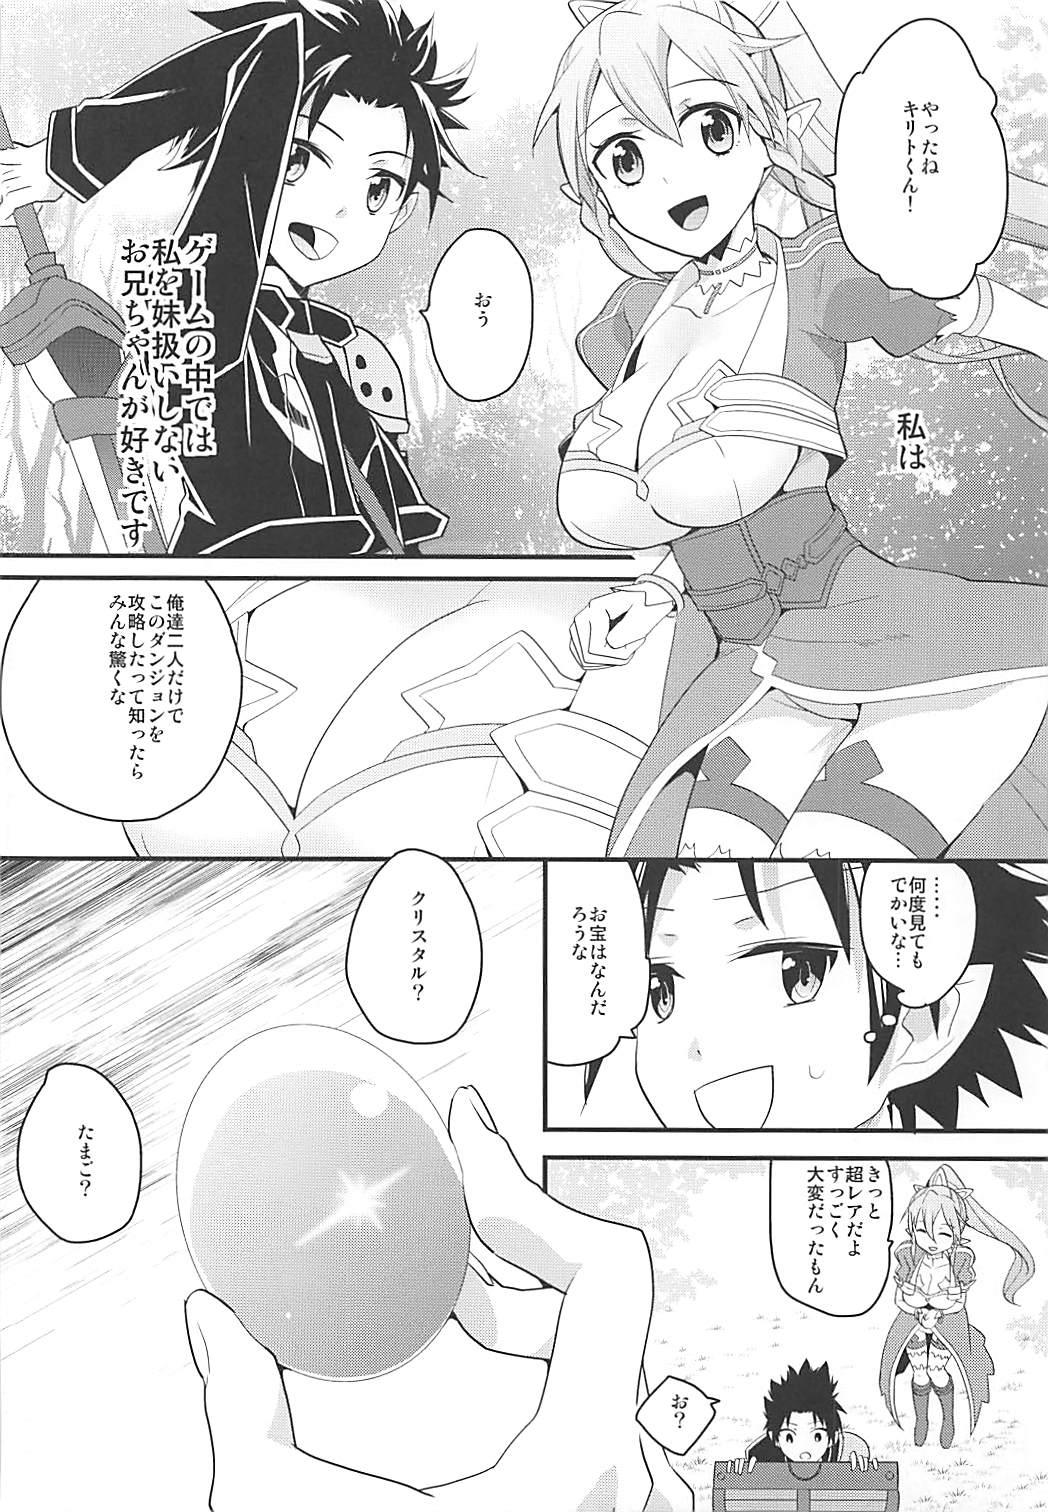 Teen Blowjob Perfect Sister - Sword art online Shemale Sex - Page 3